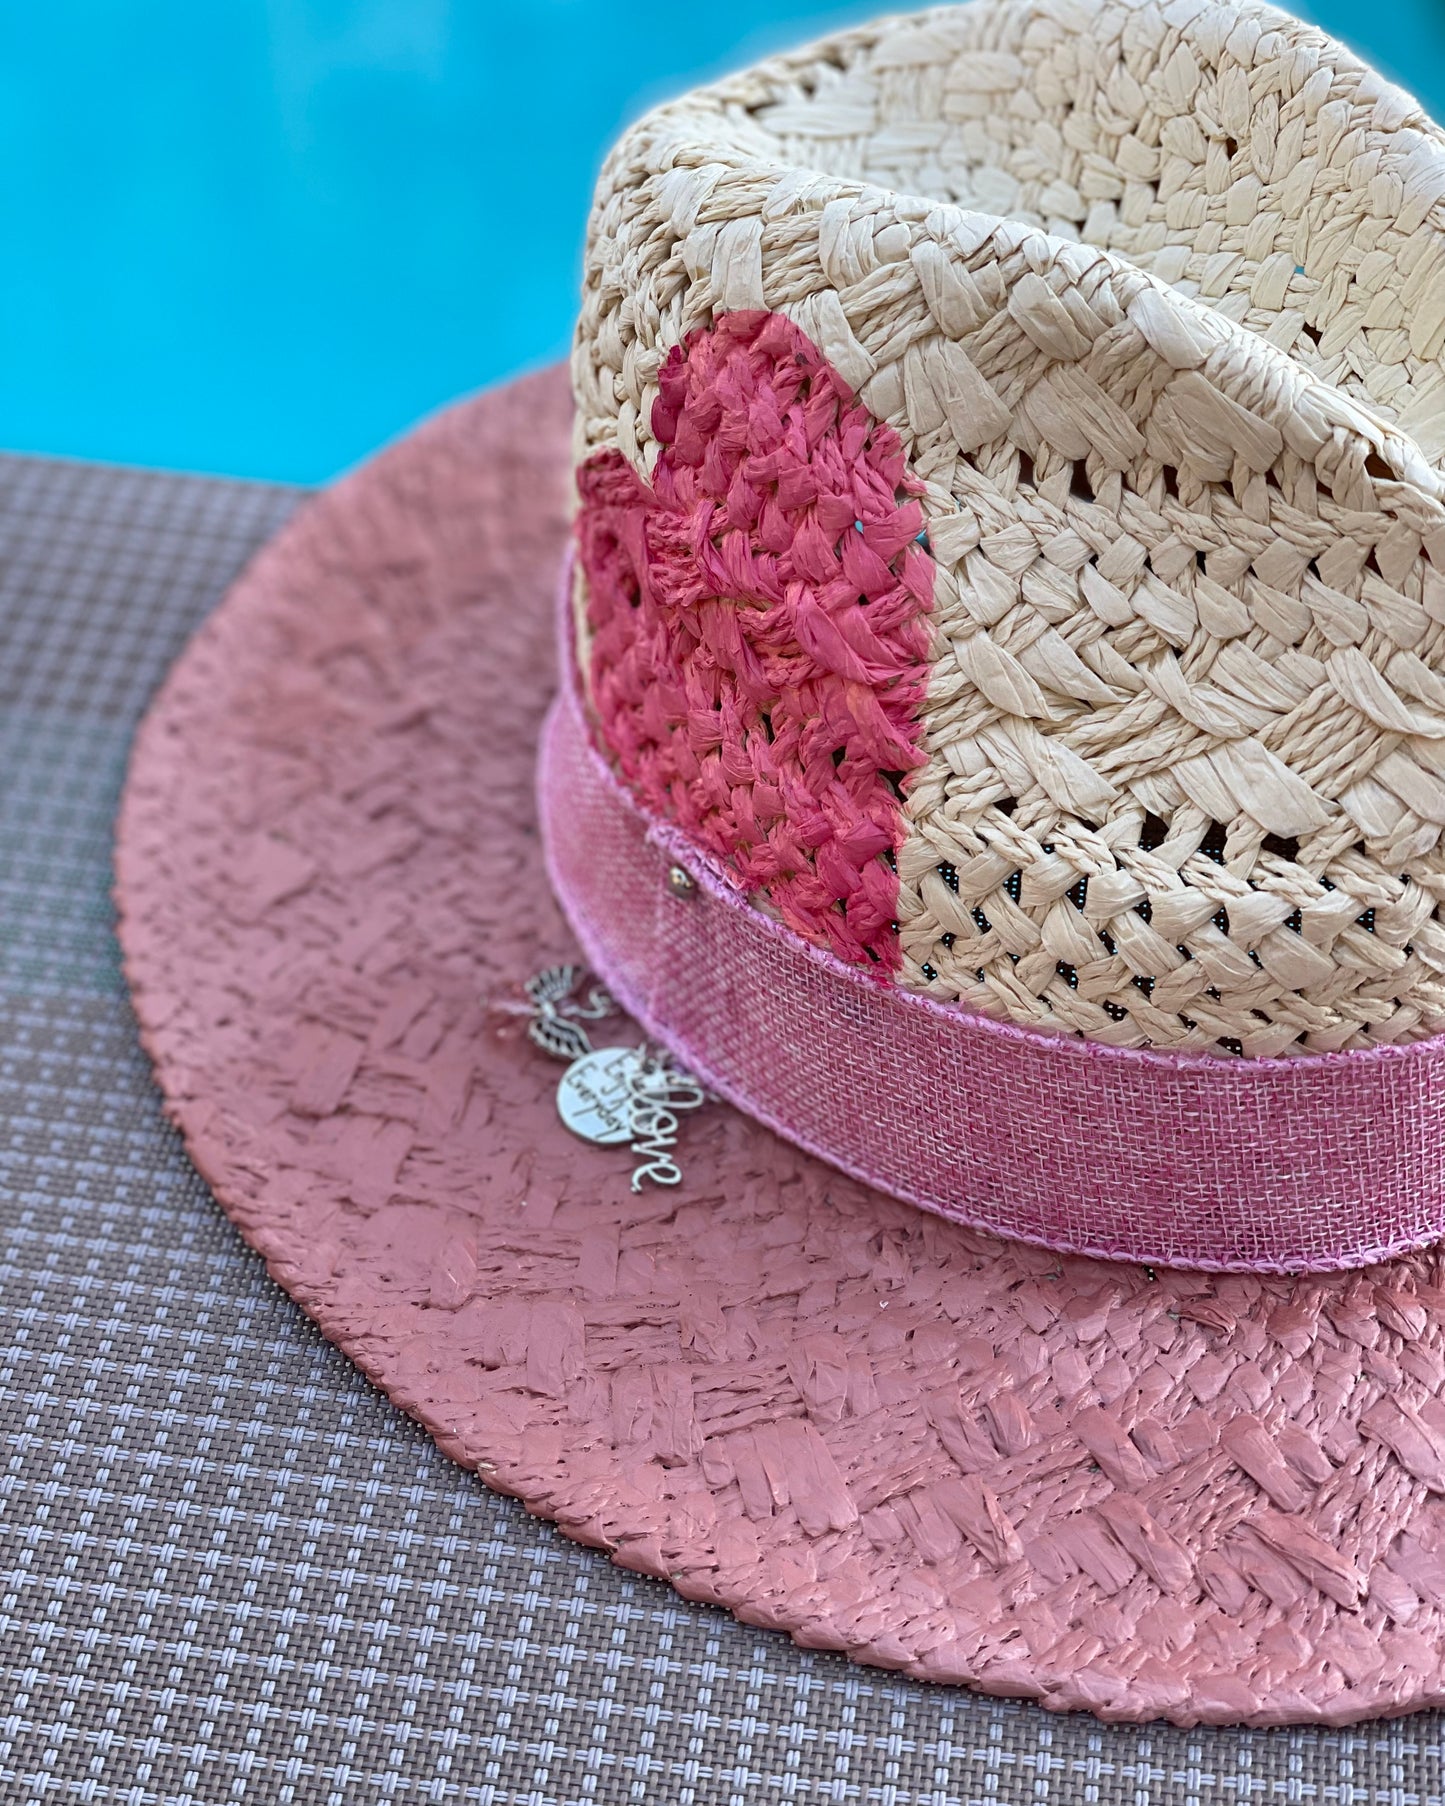 LOVELY DAY - Hand Painted Panama Hat